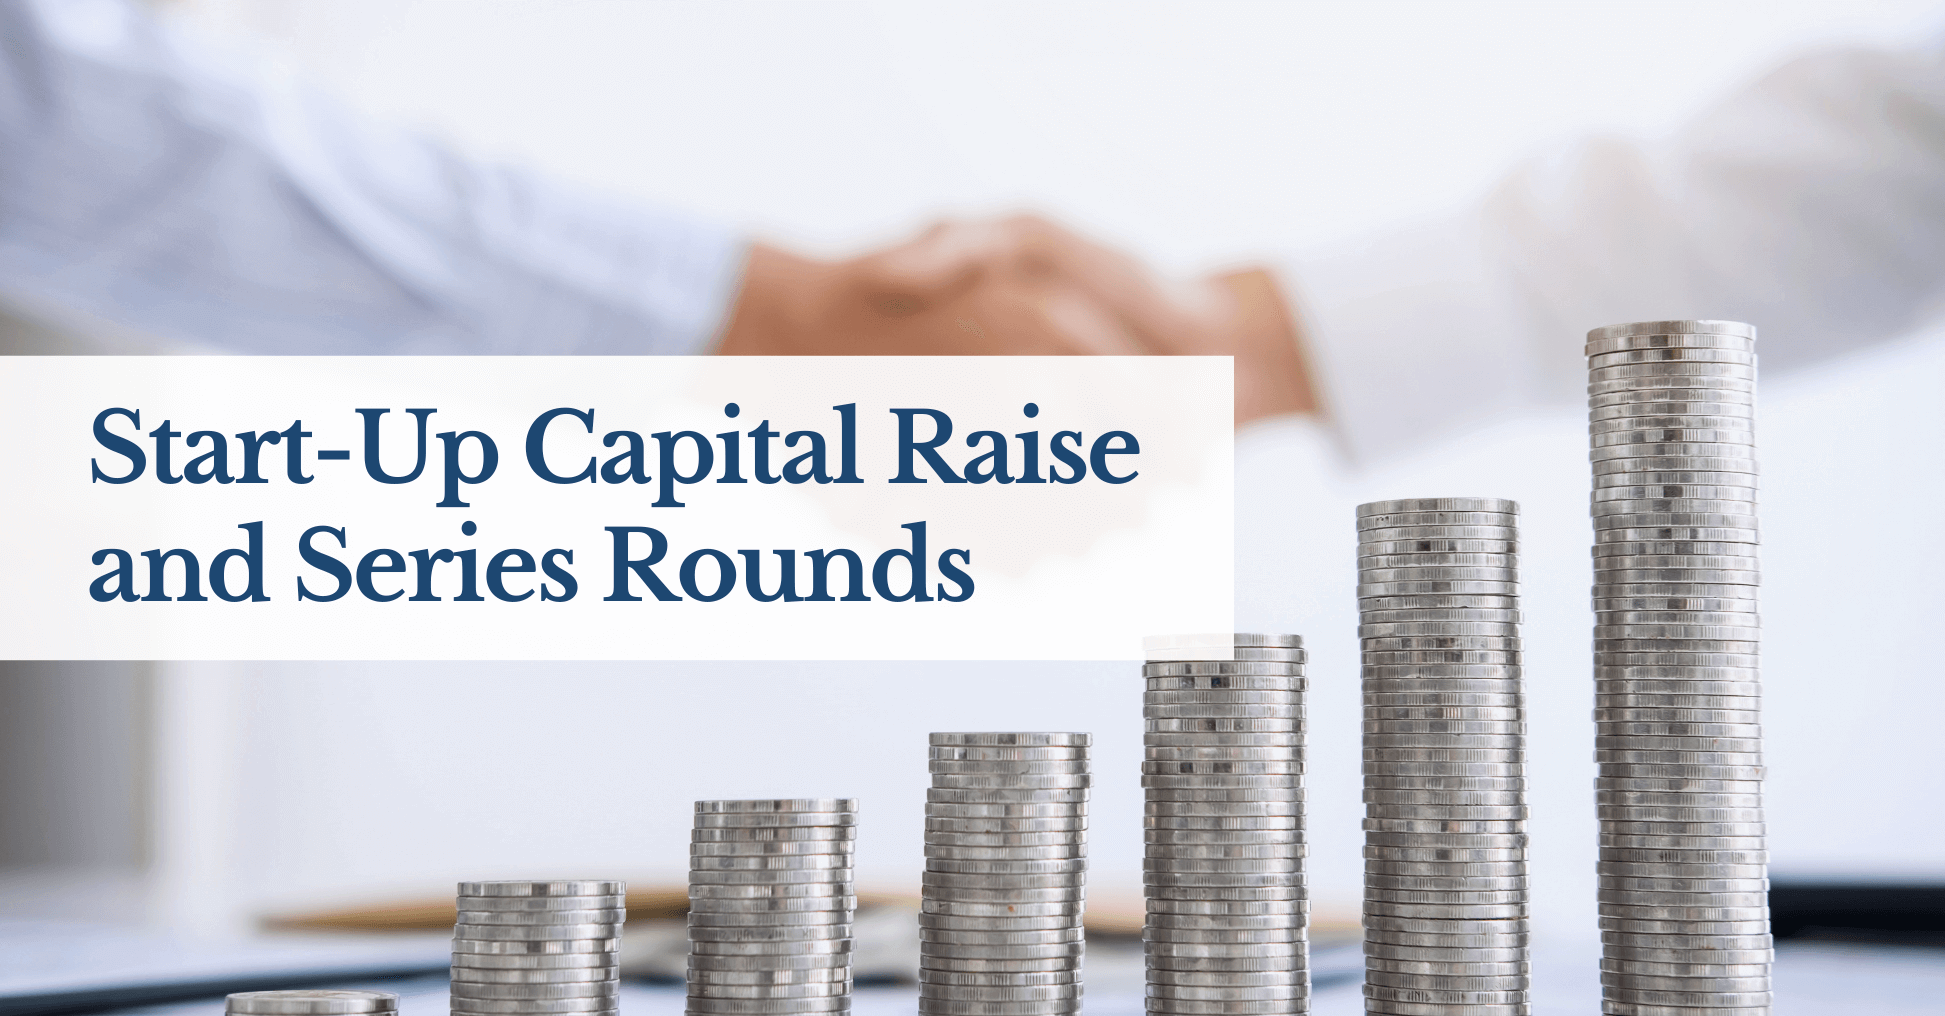 Start-Up Capital Raise and Series Rounds